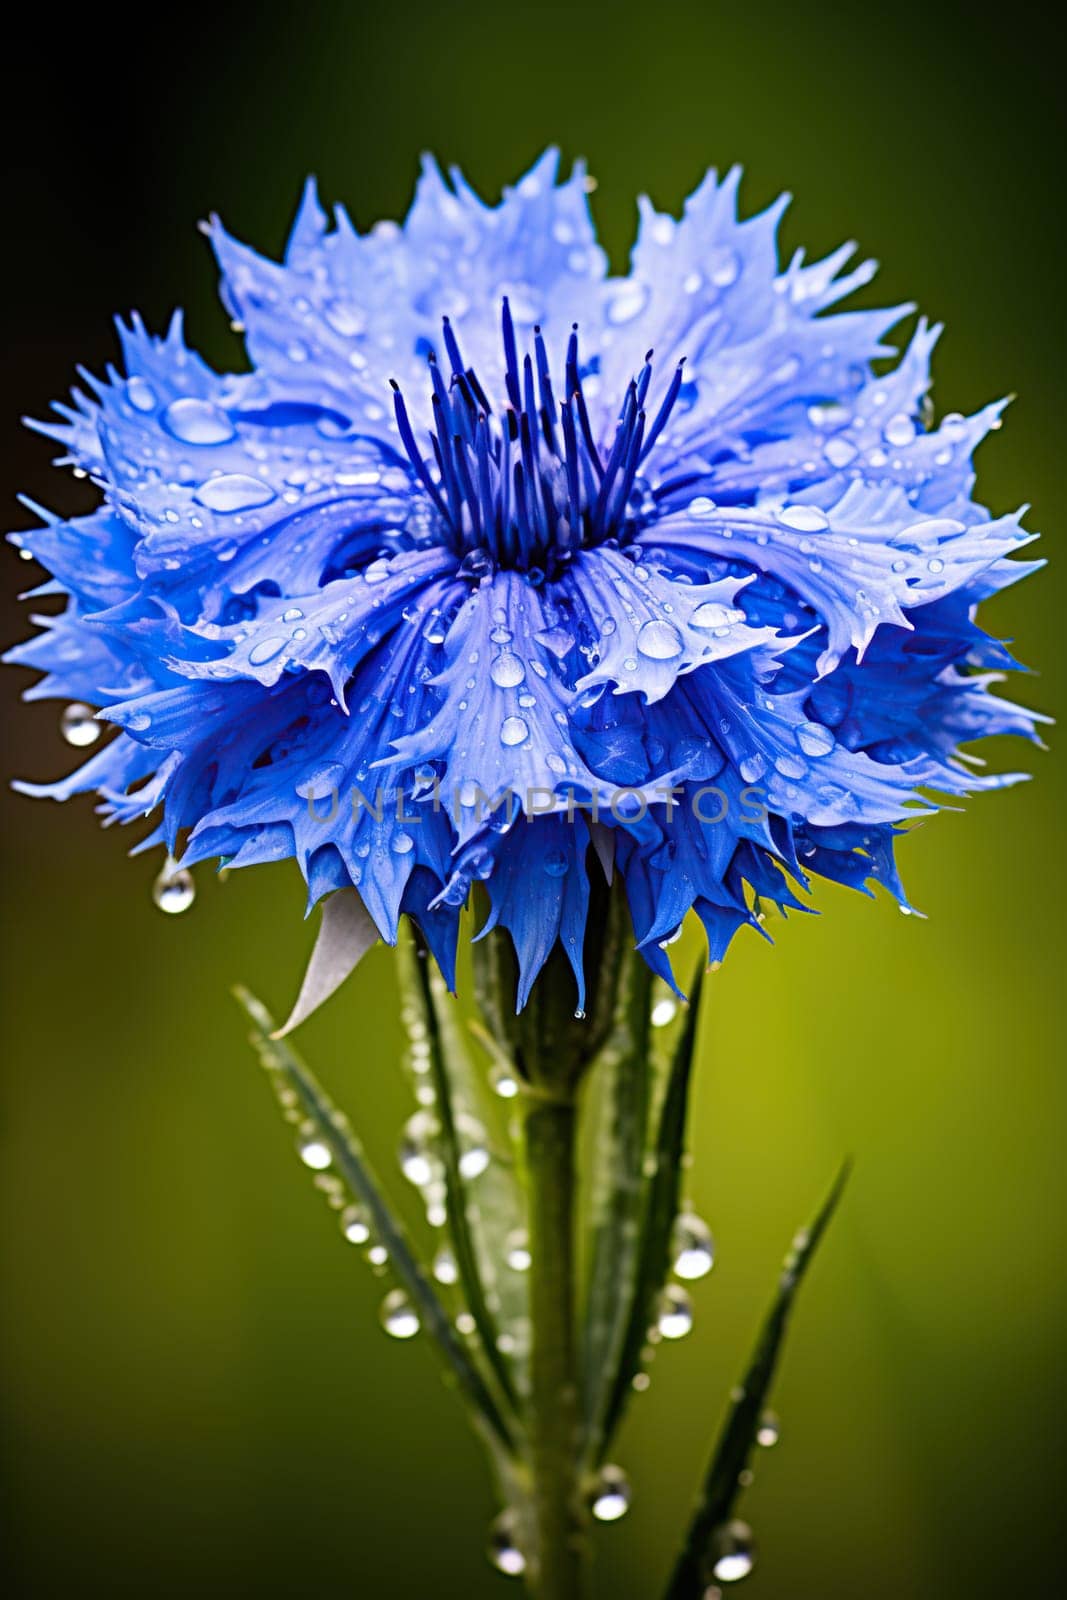 Cornflower with raindrops close-up. Blue flower on a green field.